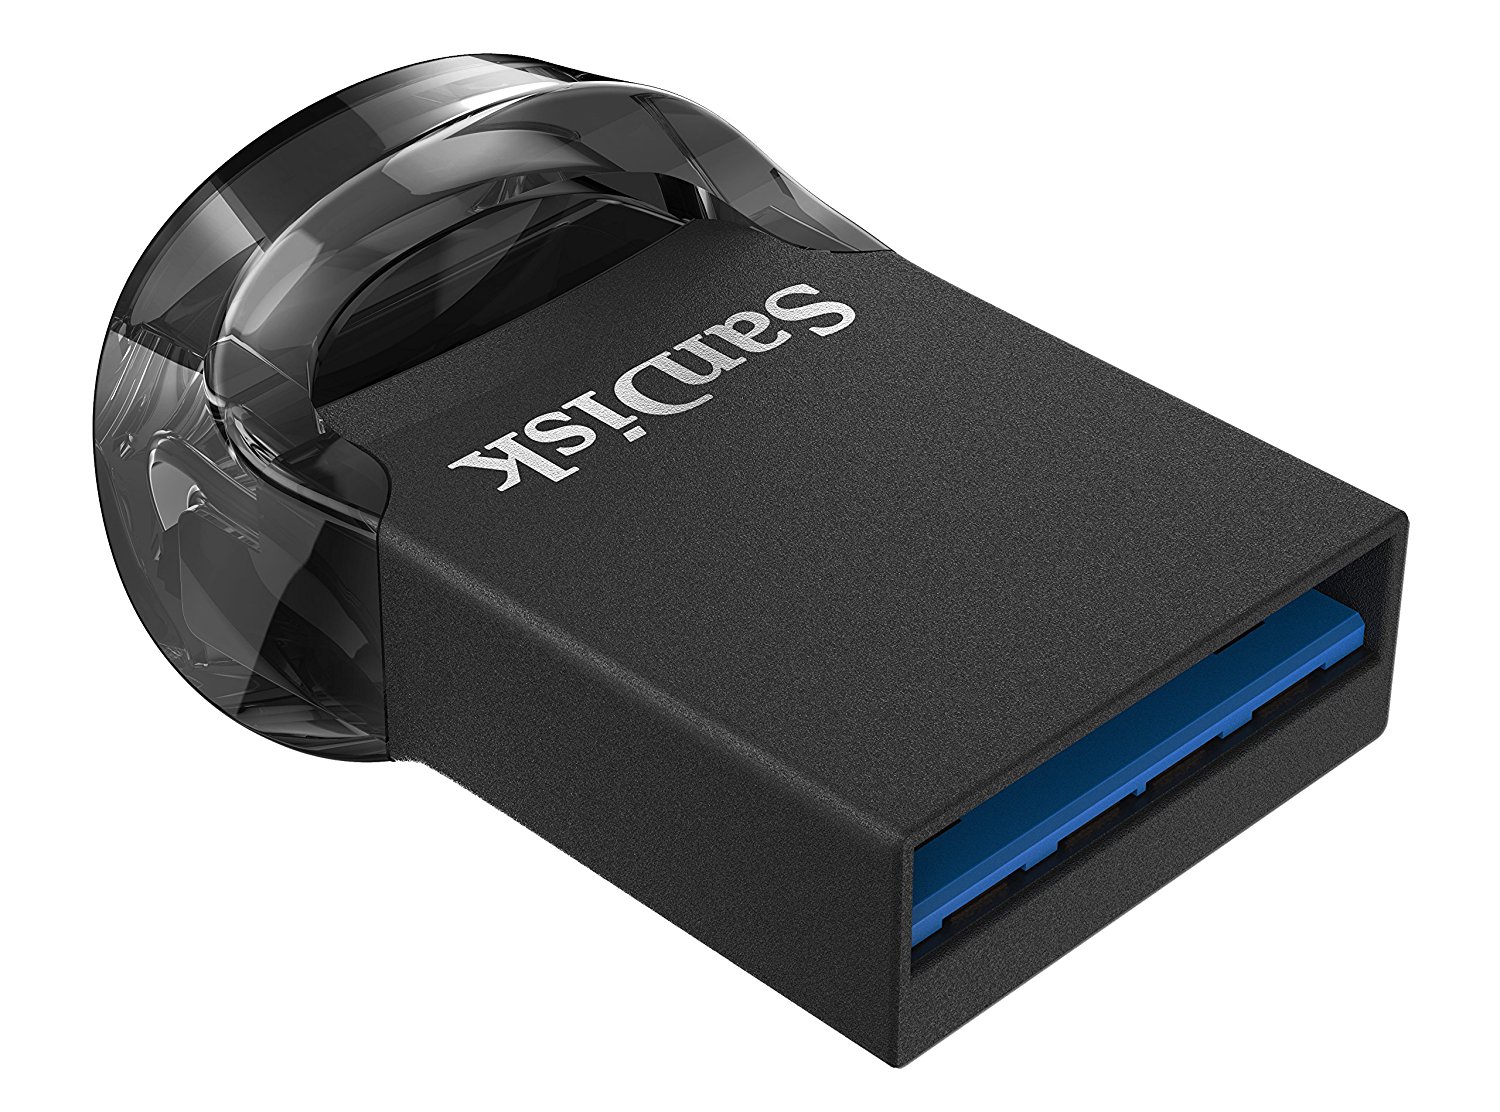 Sandisk Ultra Fit USB 3.1 Small Form Factor Flash Drives